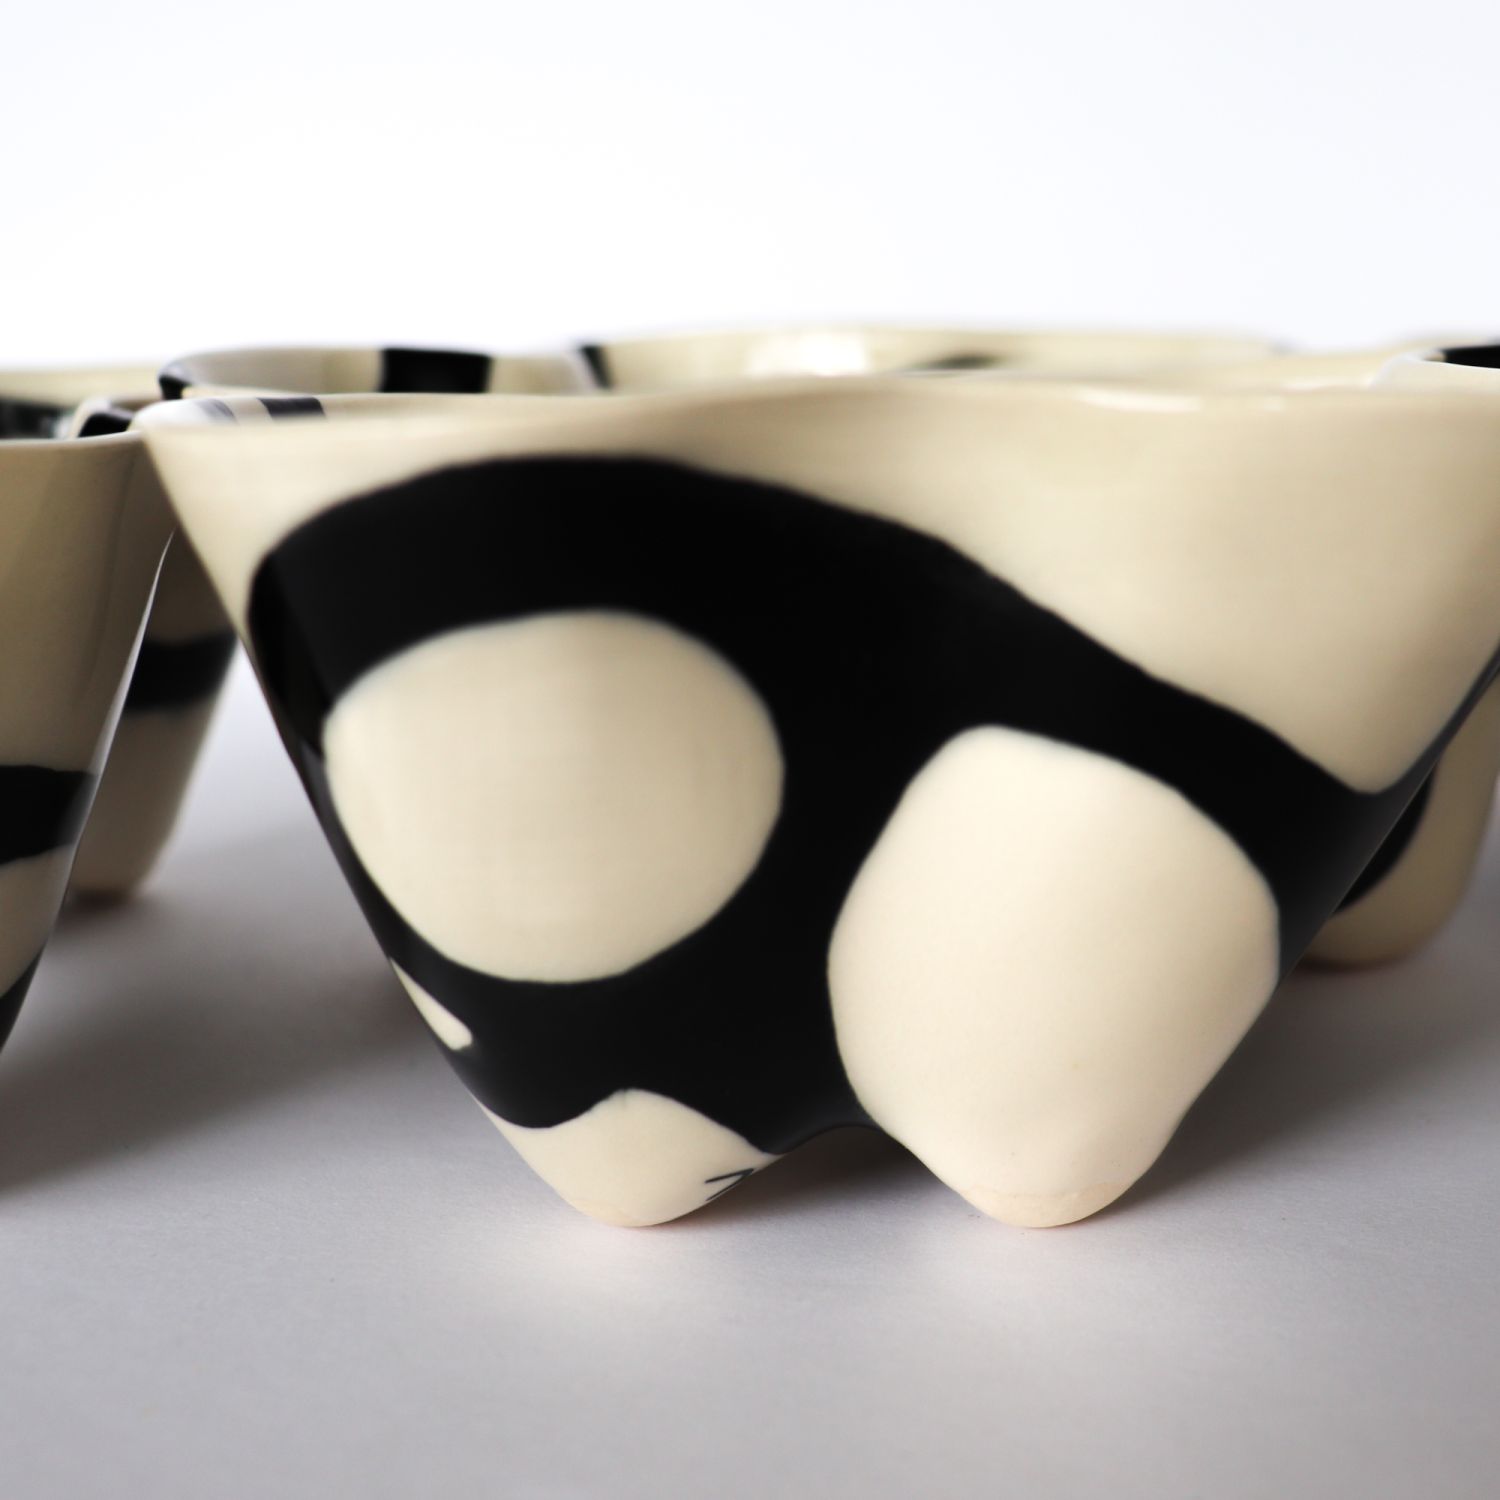 Alana Marcoccia: Interconnected Sculptural Bowl Product Image 4 of 13